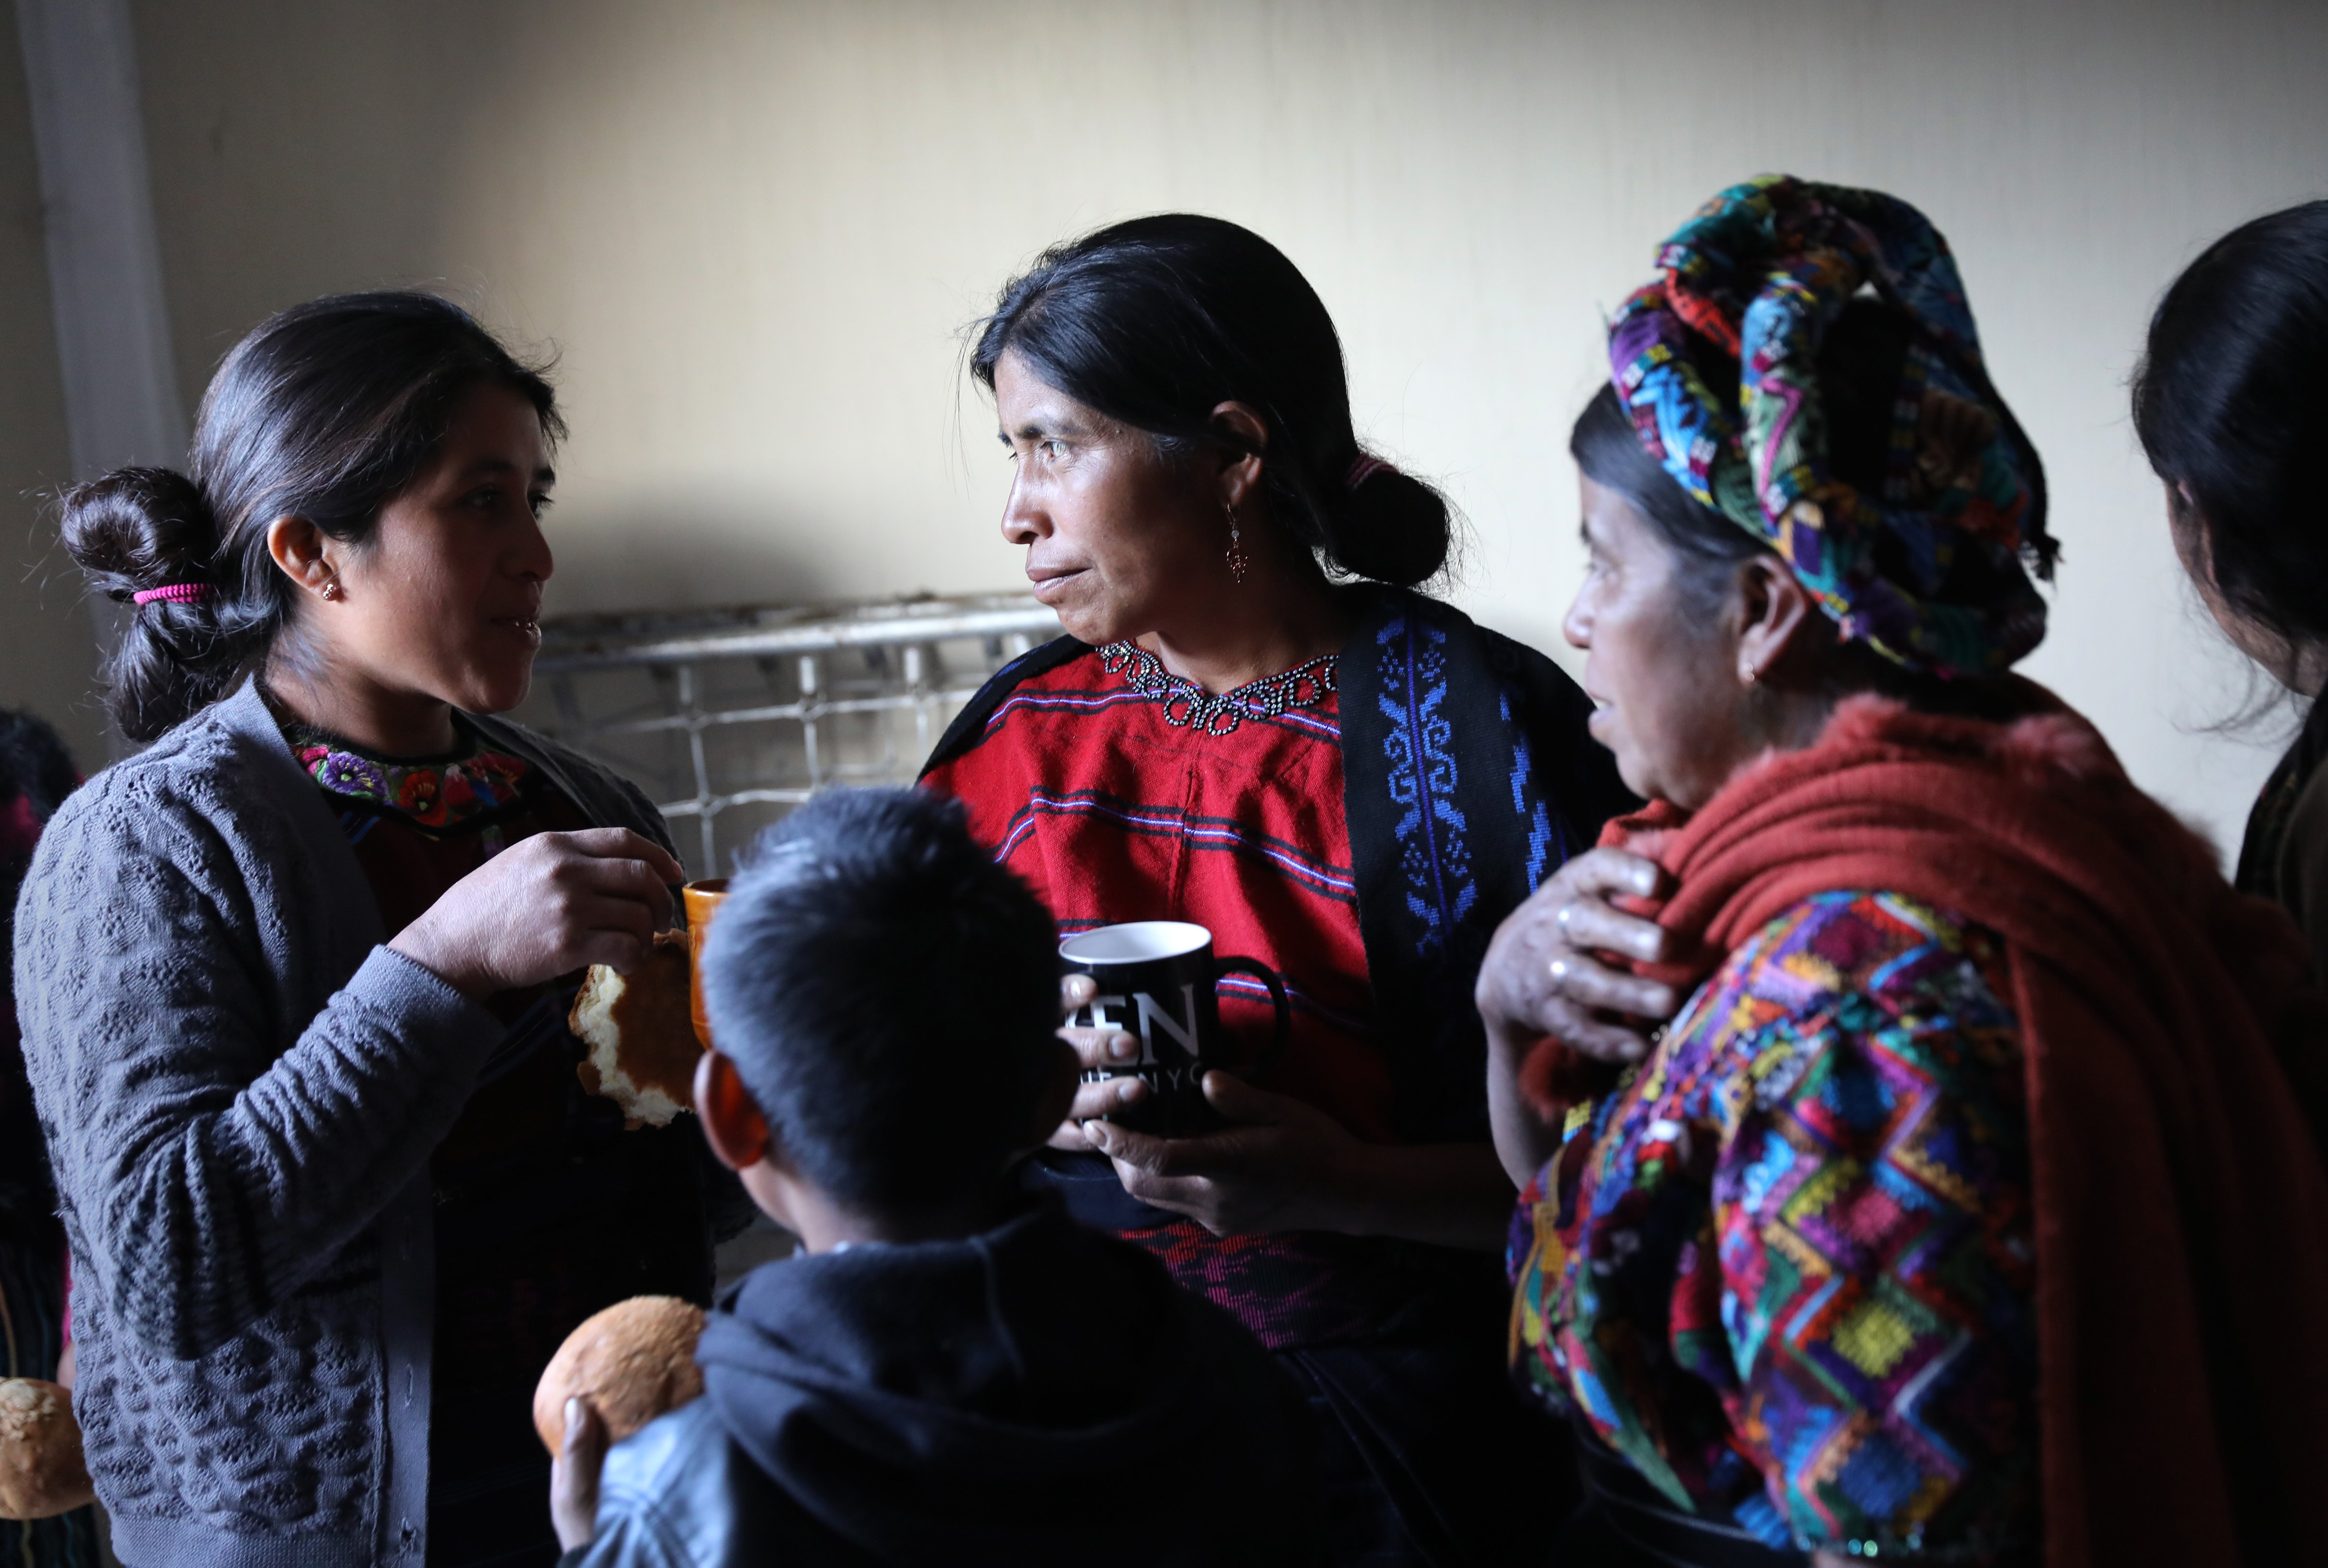 Indigenous Mayan Mam-speaking women drink coffee after a group meeting on February 12, 2017 in Cajola, Guatemala. Women are especially affected by emigration. In Cajola, in the highlands of western Guatemala, some 70 percent of the men have emigrated to the United States to work, many leaving behind wives and children who barely know their fathers. (John Moore—Getty Images)